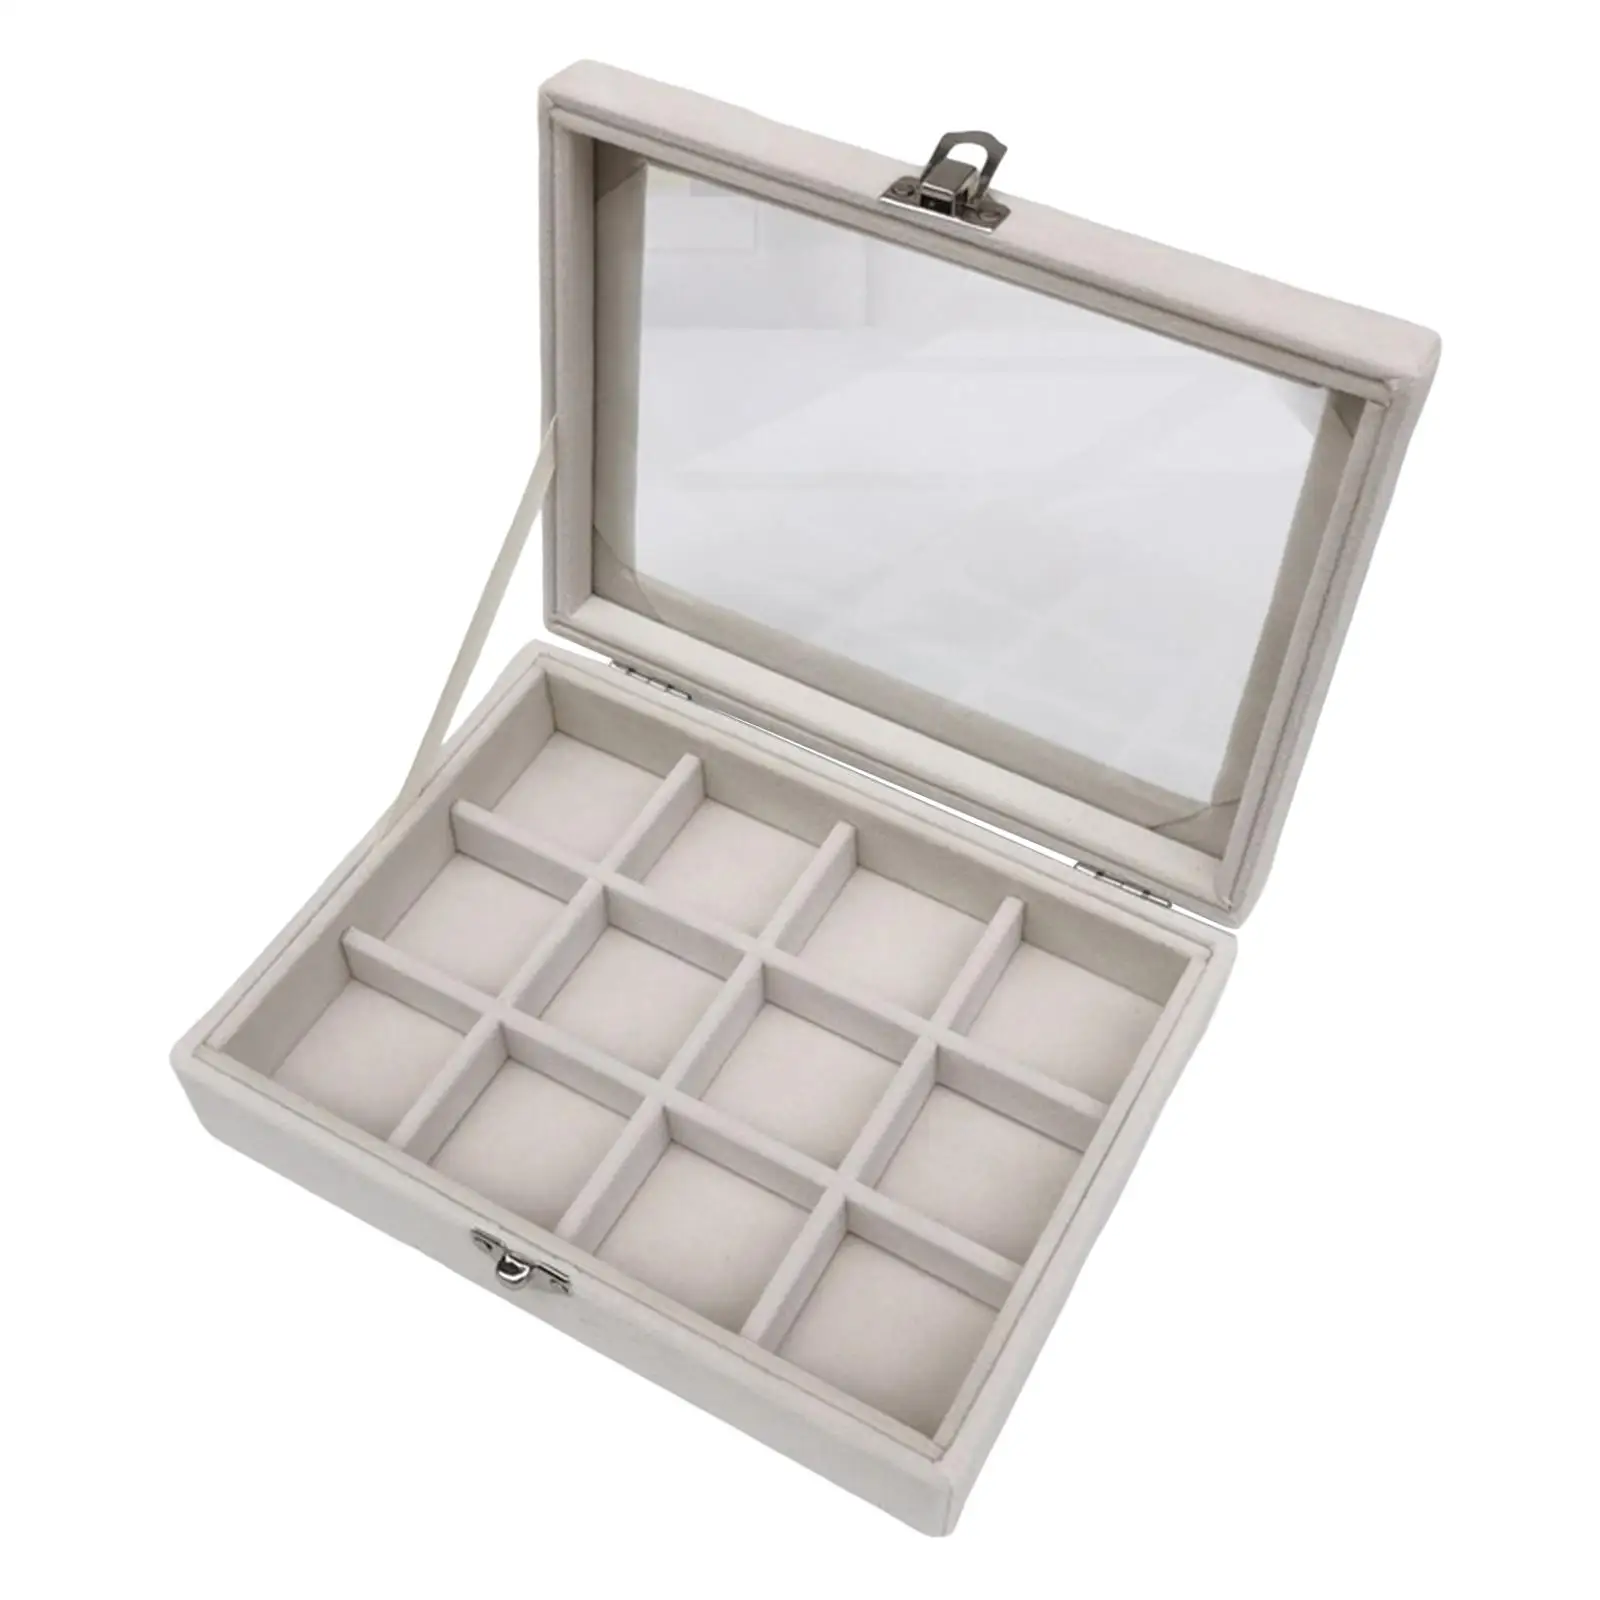 Portable Travel Jewelry Box Multifunctional Gift Flannel Dustproof Showcase for Watches Ear Studs Bangle Bracelets Girls